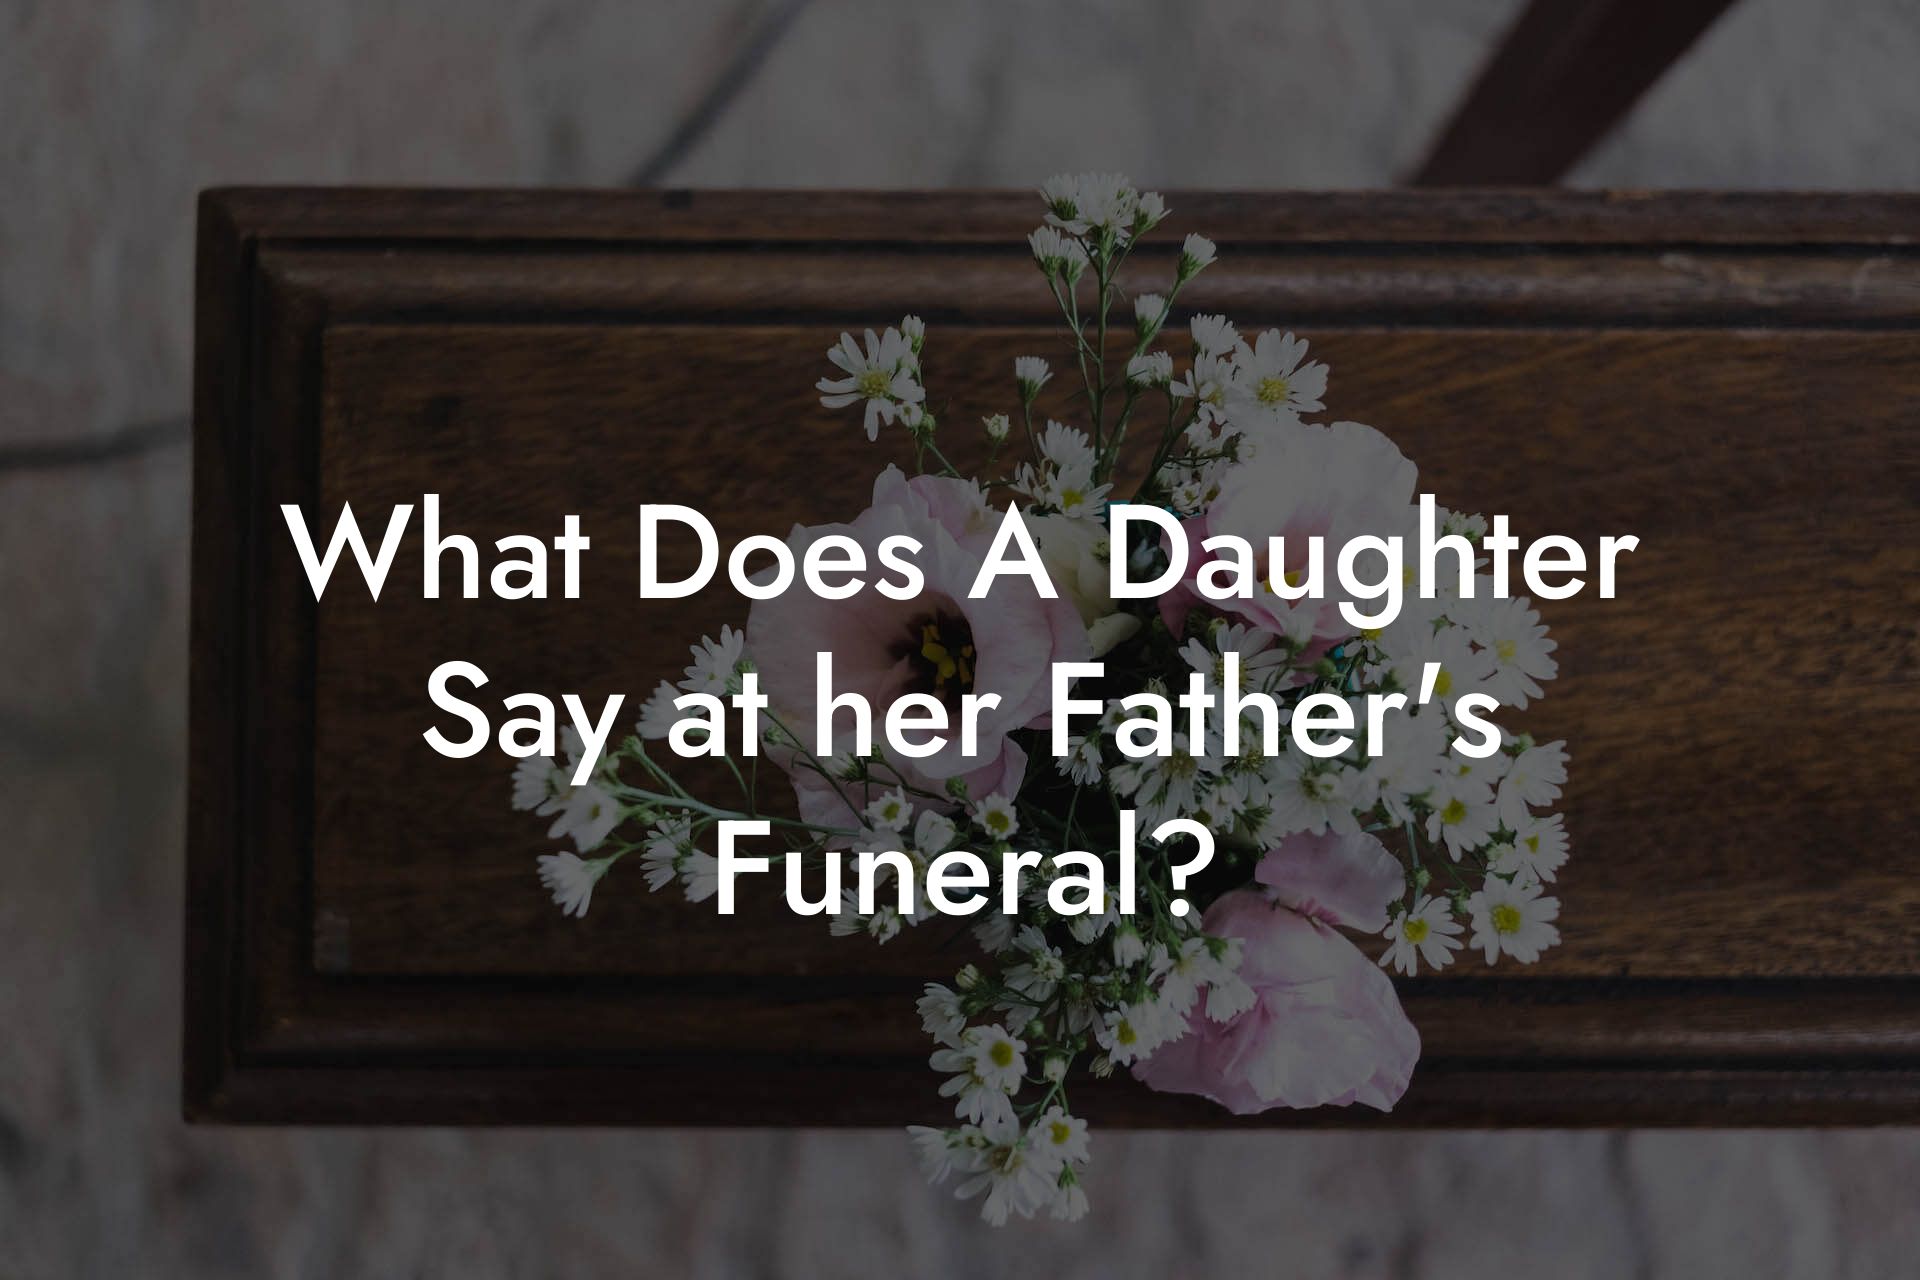 What Does A Daughter Say at her Father's Funeral?